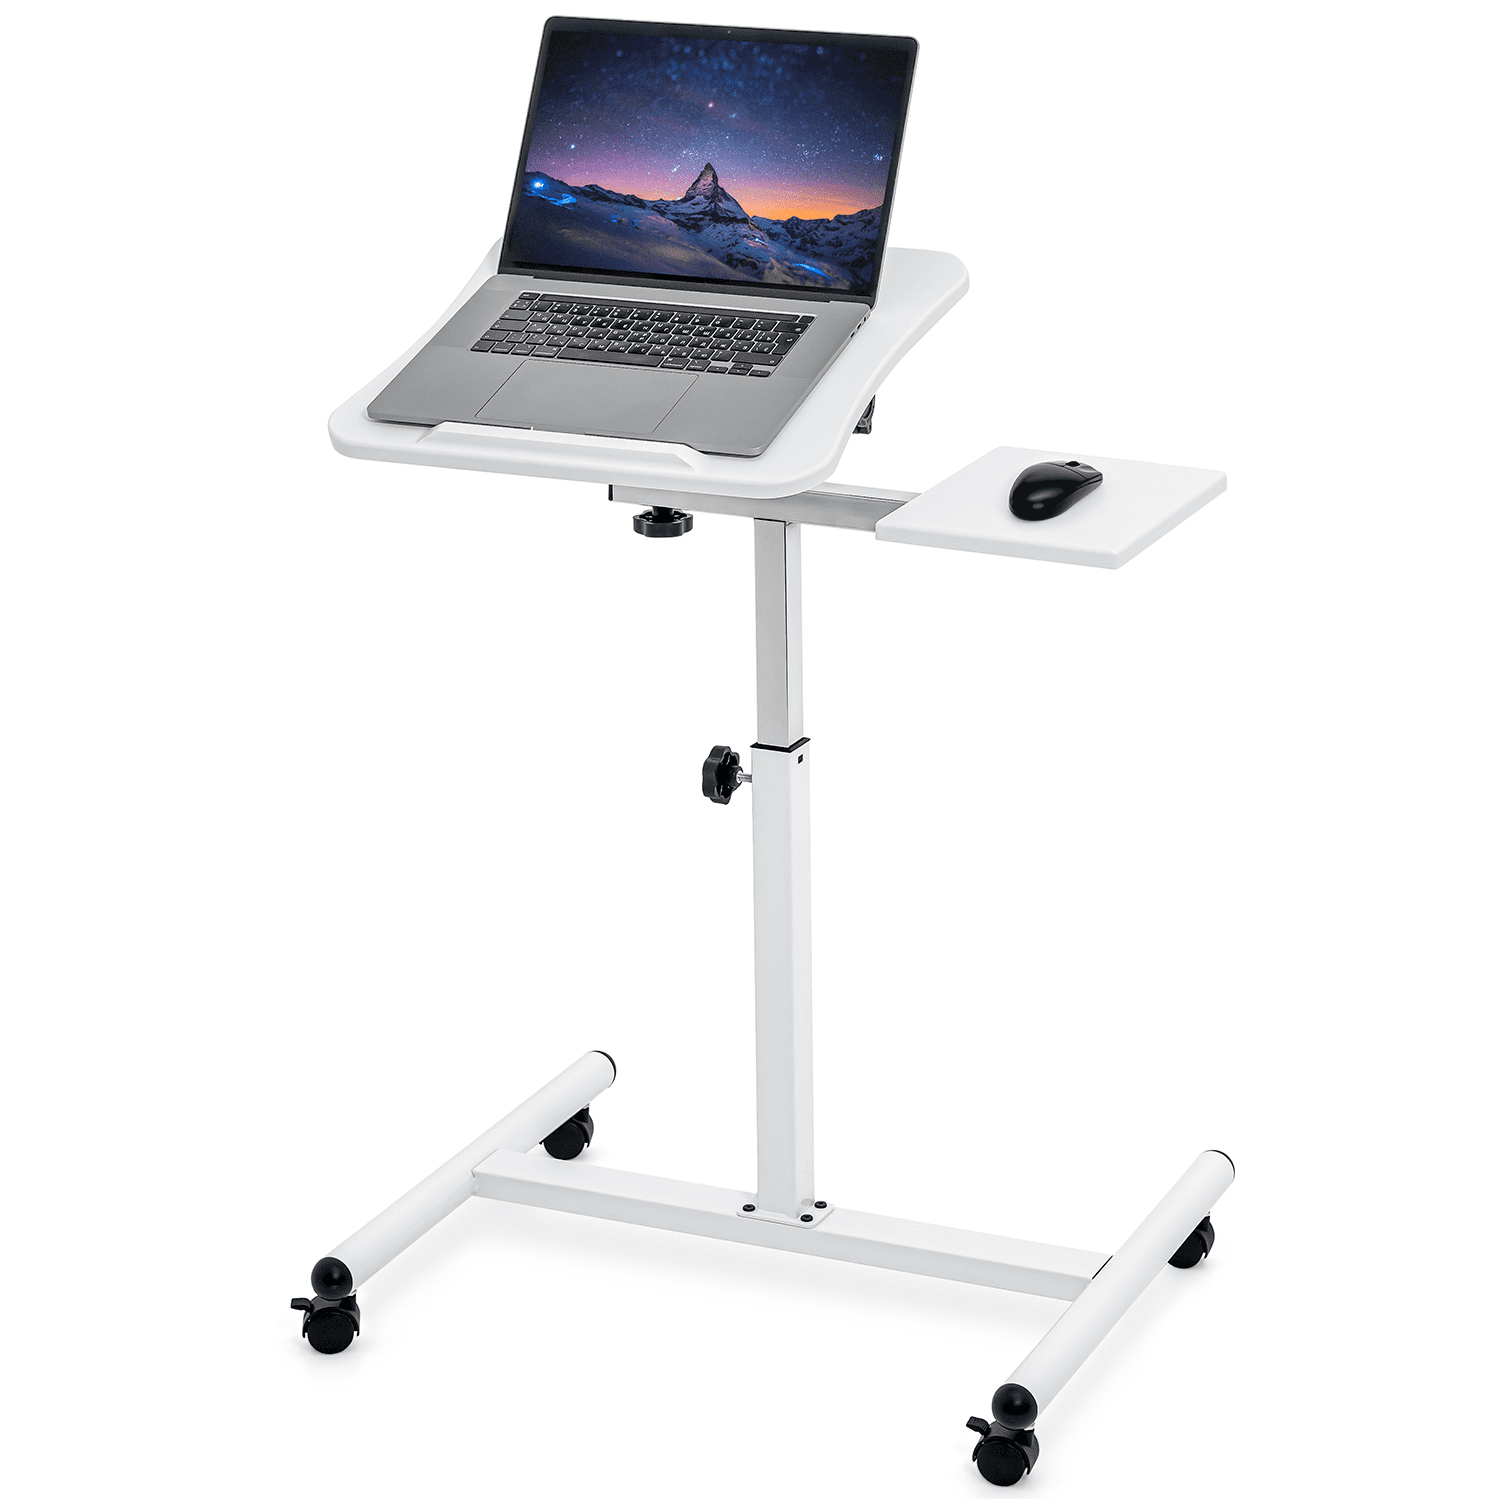 Lap Desk - With Retractable Mouse Pad - Monitor Mounts, Display Mounts and  Ergonomics